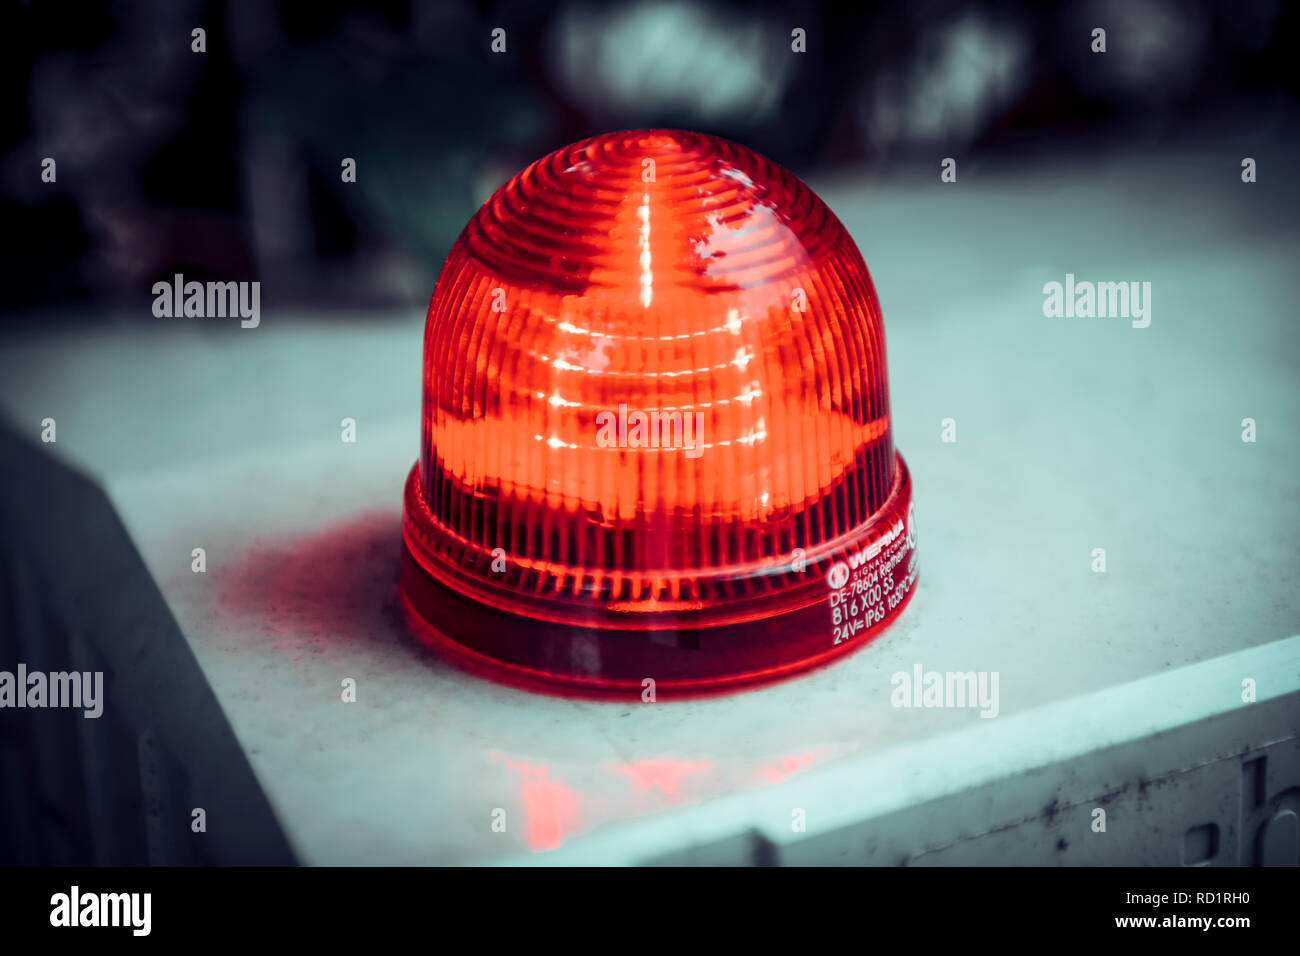 Red Alarm Light High Resolution Stock Photography and Images - Alamy